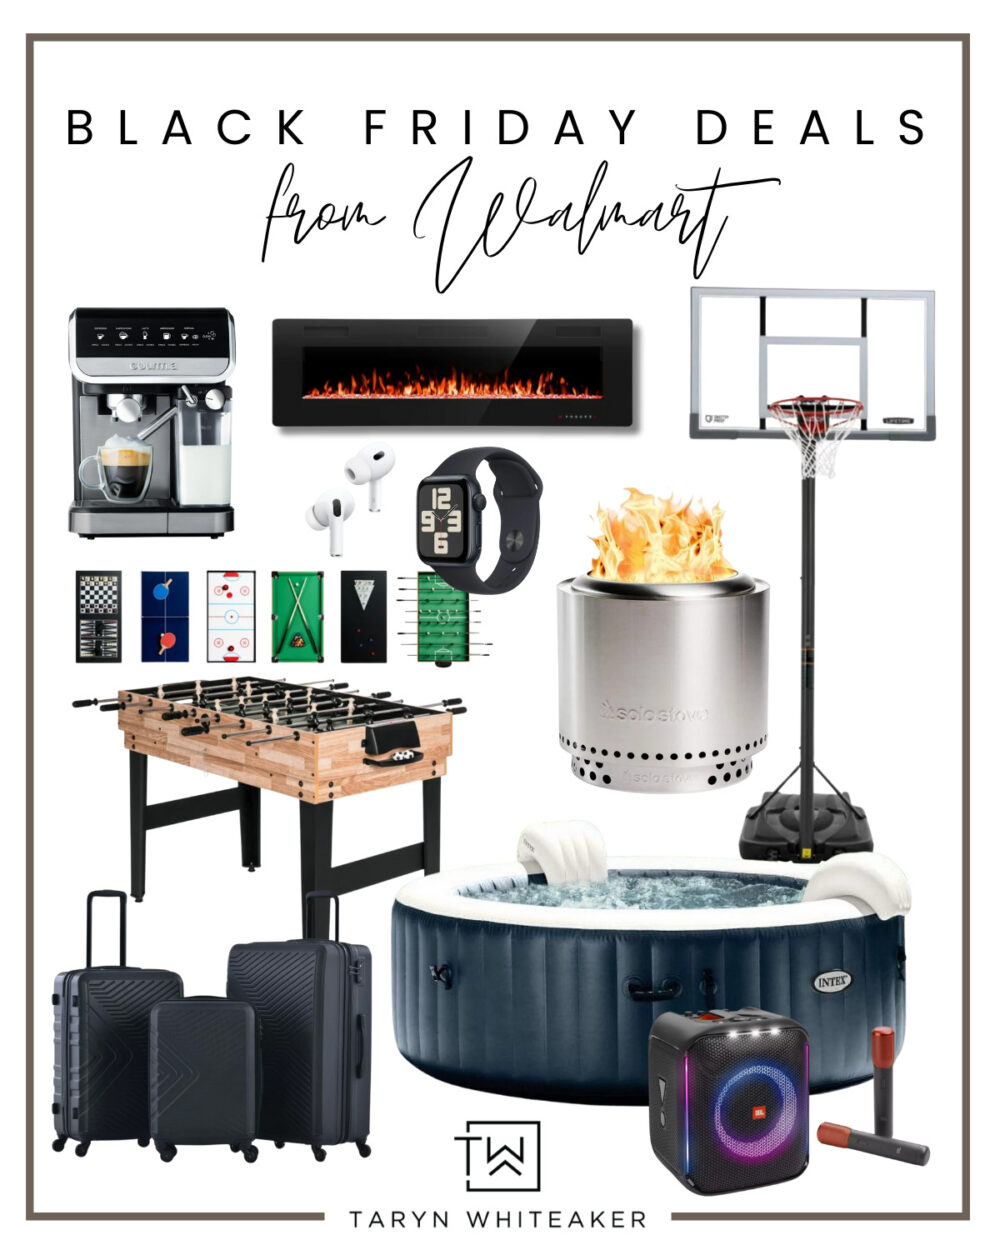 black friday, cyber monday, taryn whiteaker, home designs, shopping finds, black friday deals, cyber monday deals